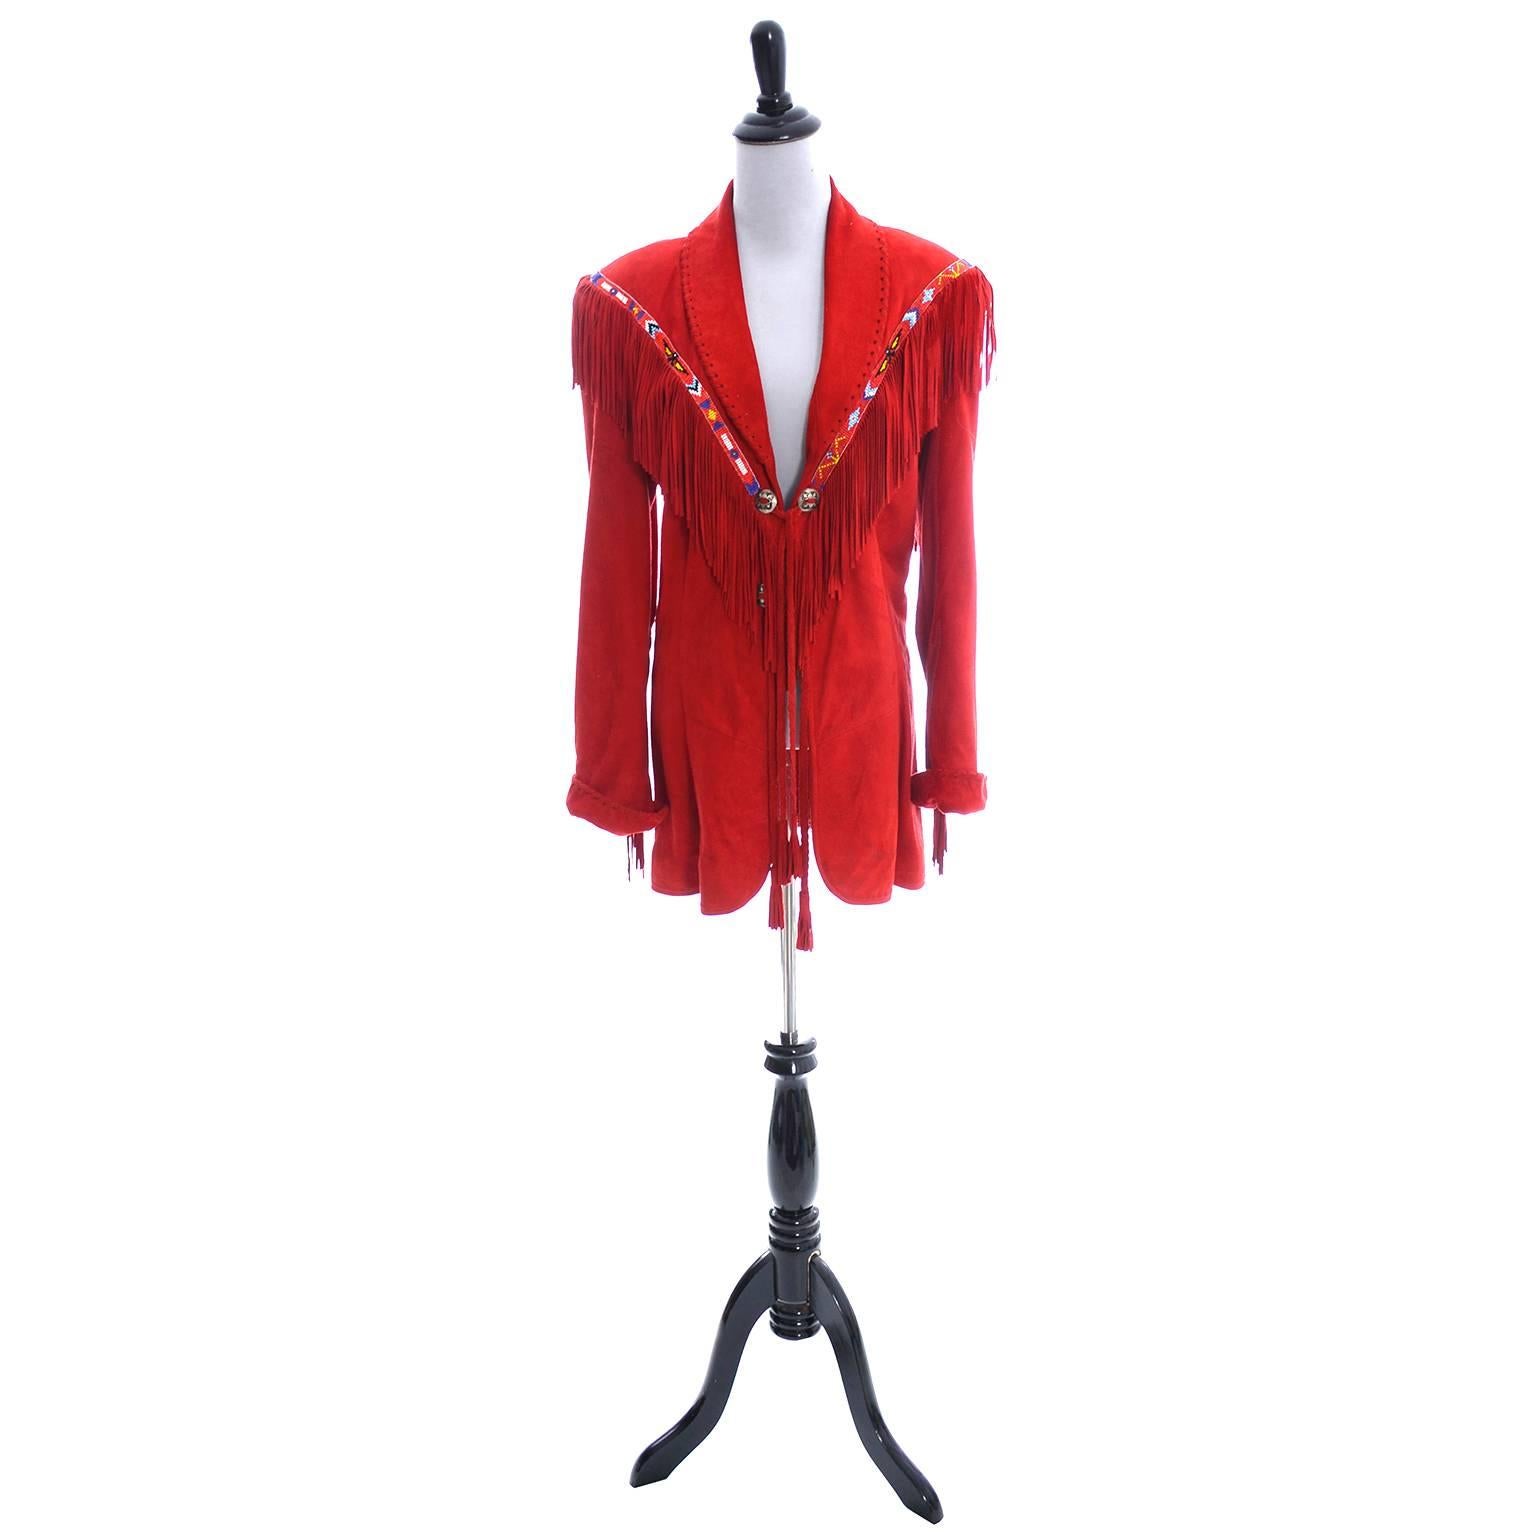 This gorgeous, luxuriously soft fine suede red jacket was made by Char of Santa Fe in the 1980s.  I acquired it from the estate of a glamorous Vail and Manhattan trend setter with an outstanding wardrobe of designer clothing.  This jacket has